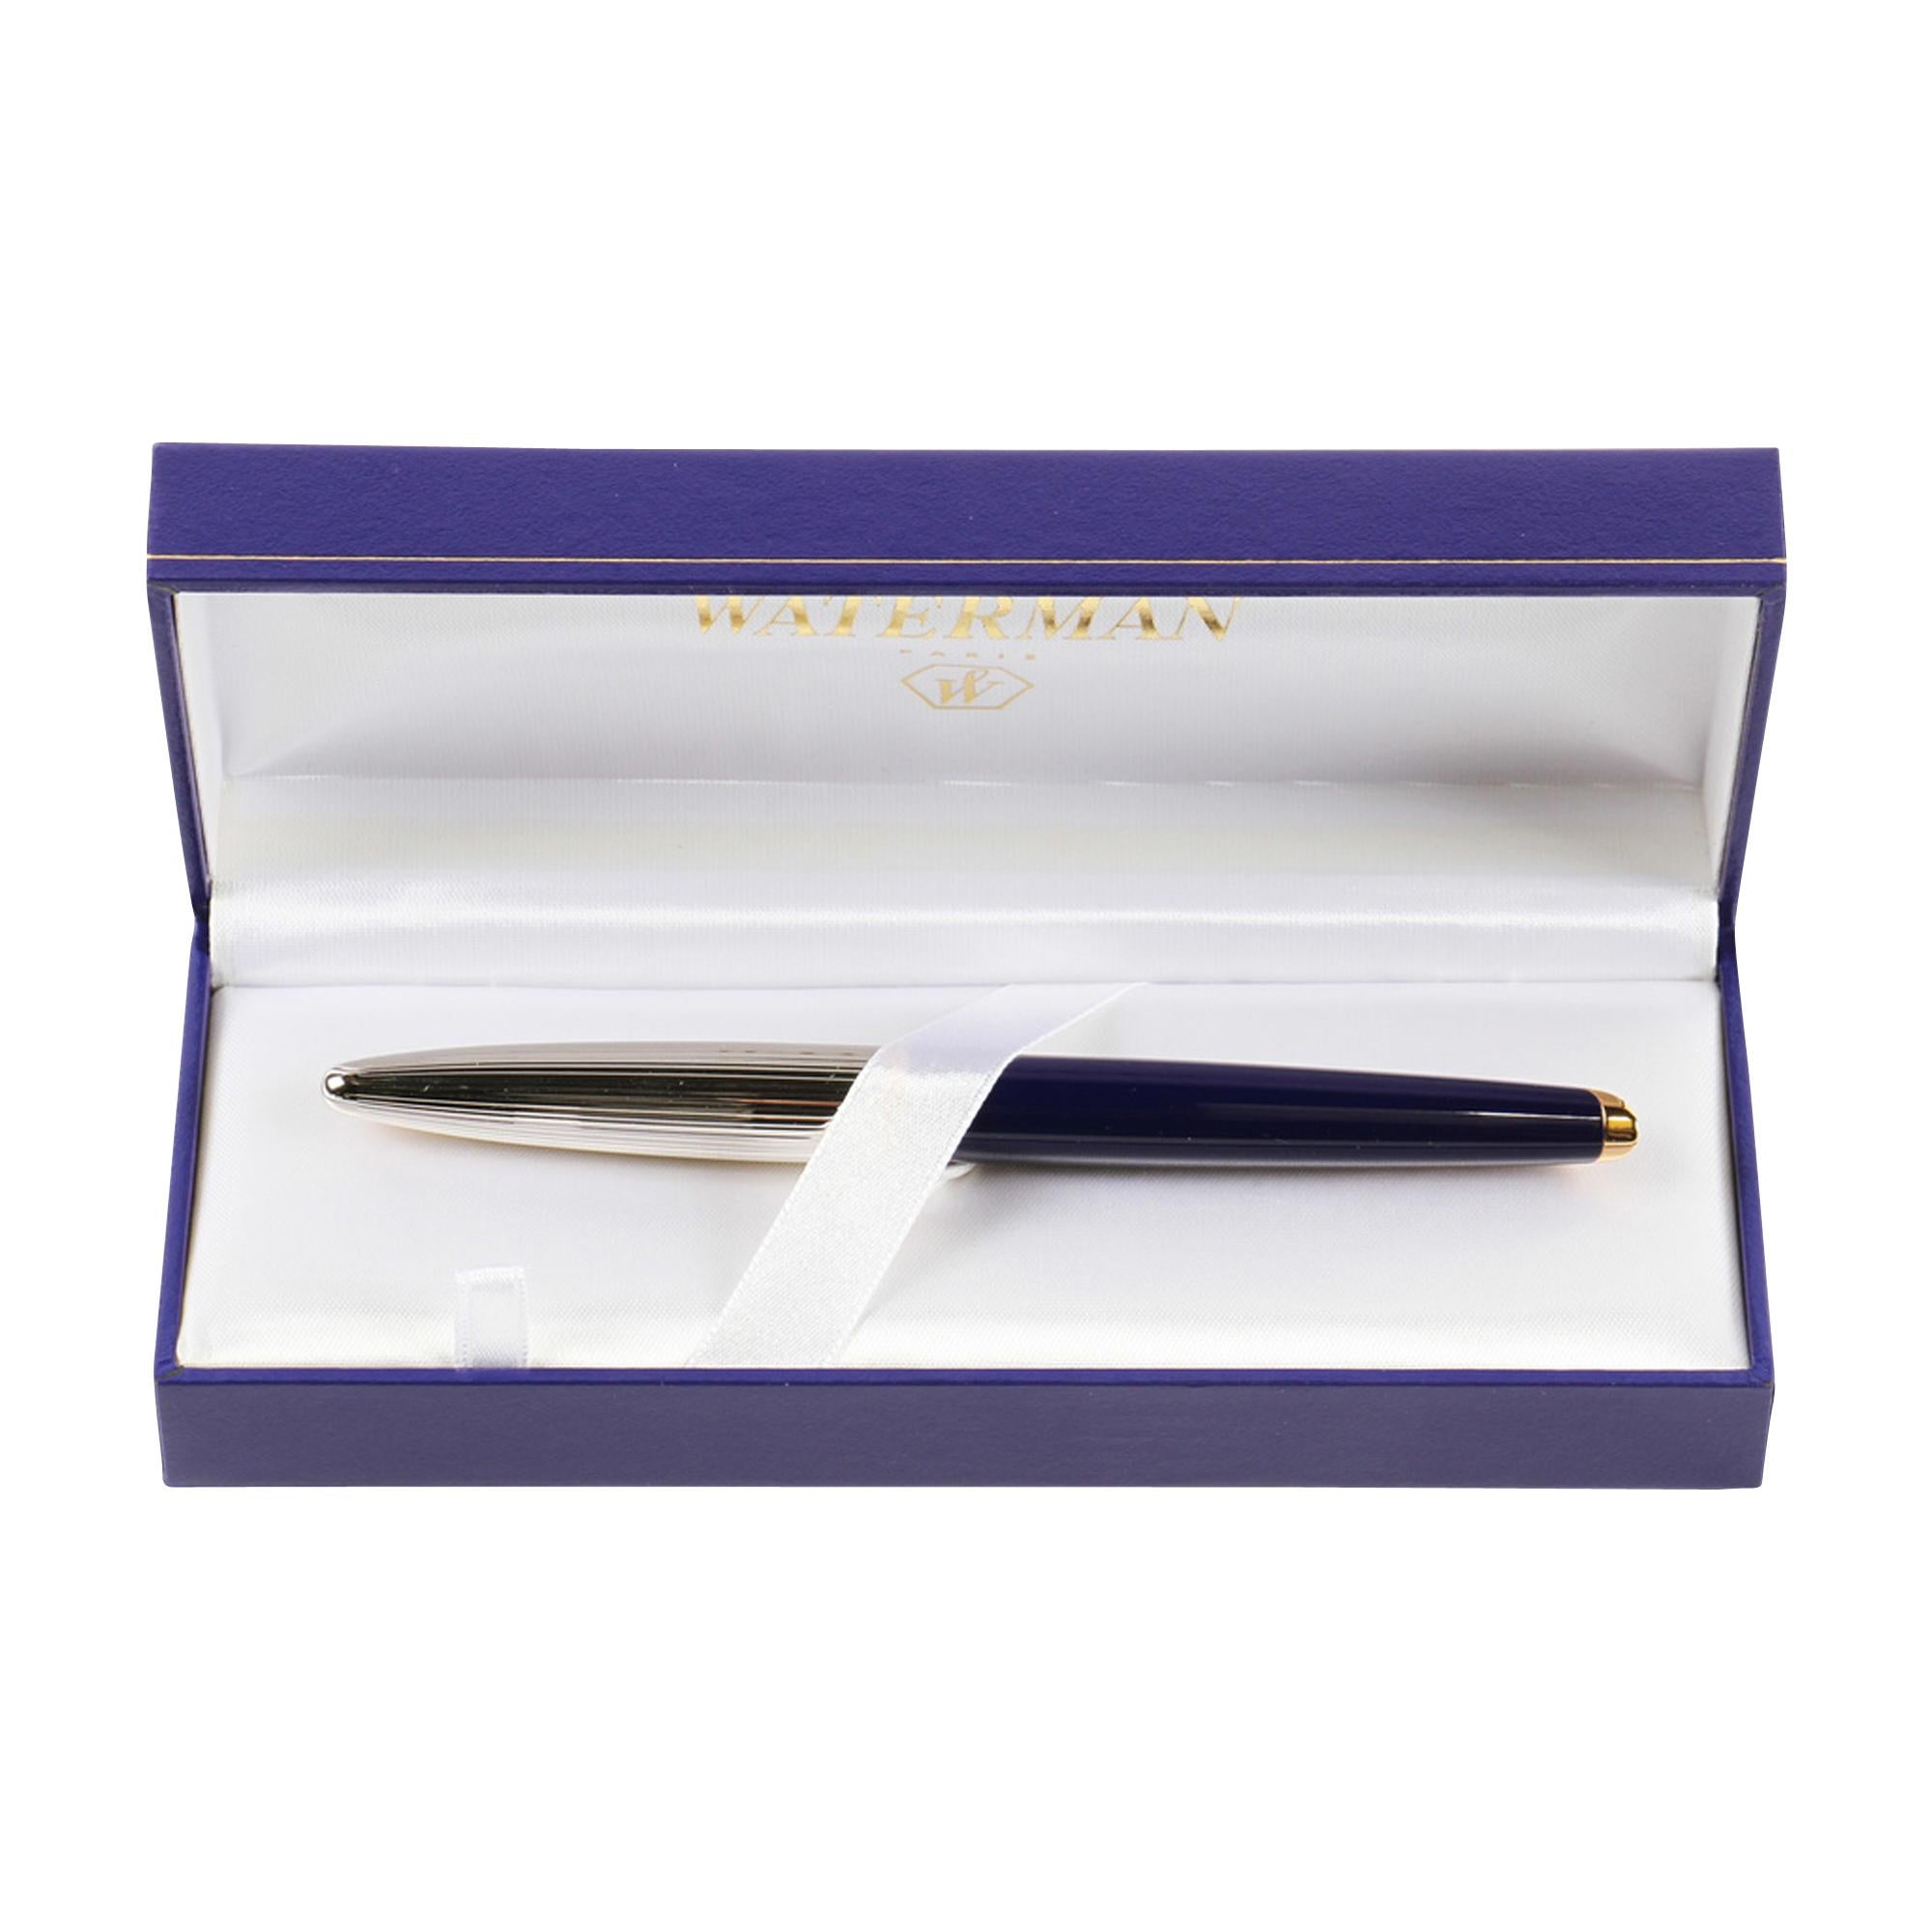 Rare 2001 Postponed Ryder Cup Waterman Ink Fountain Pen with 18K Gold Nib For Sale 7